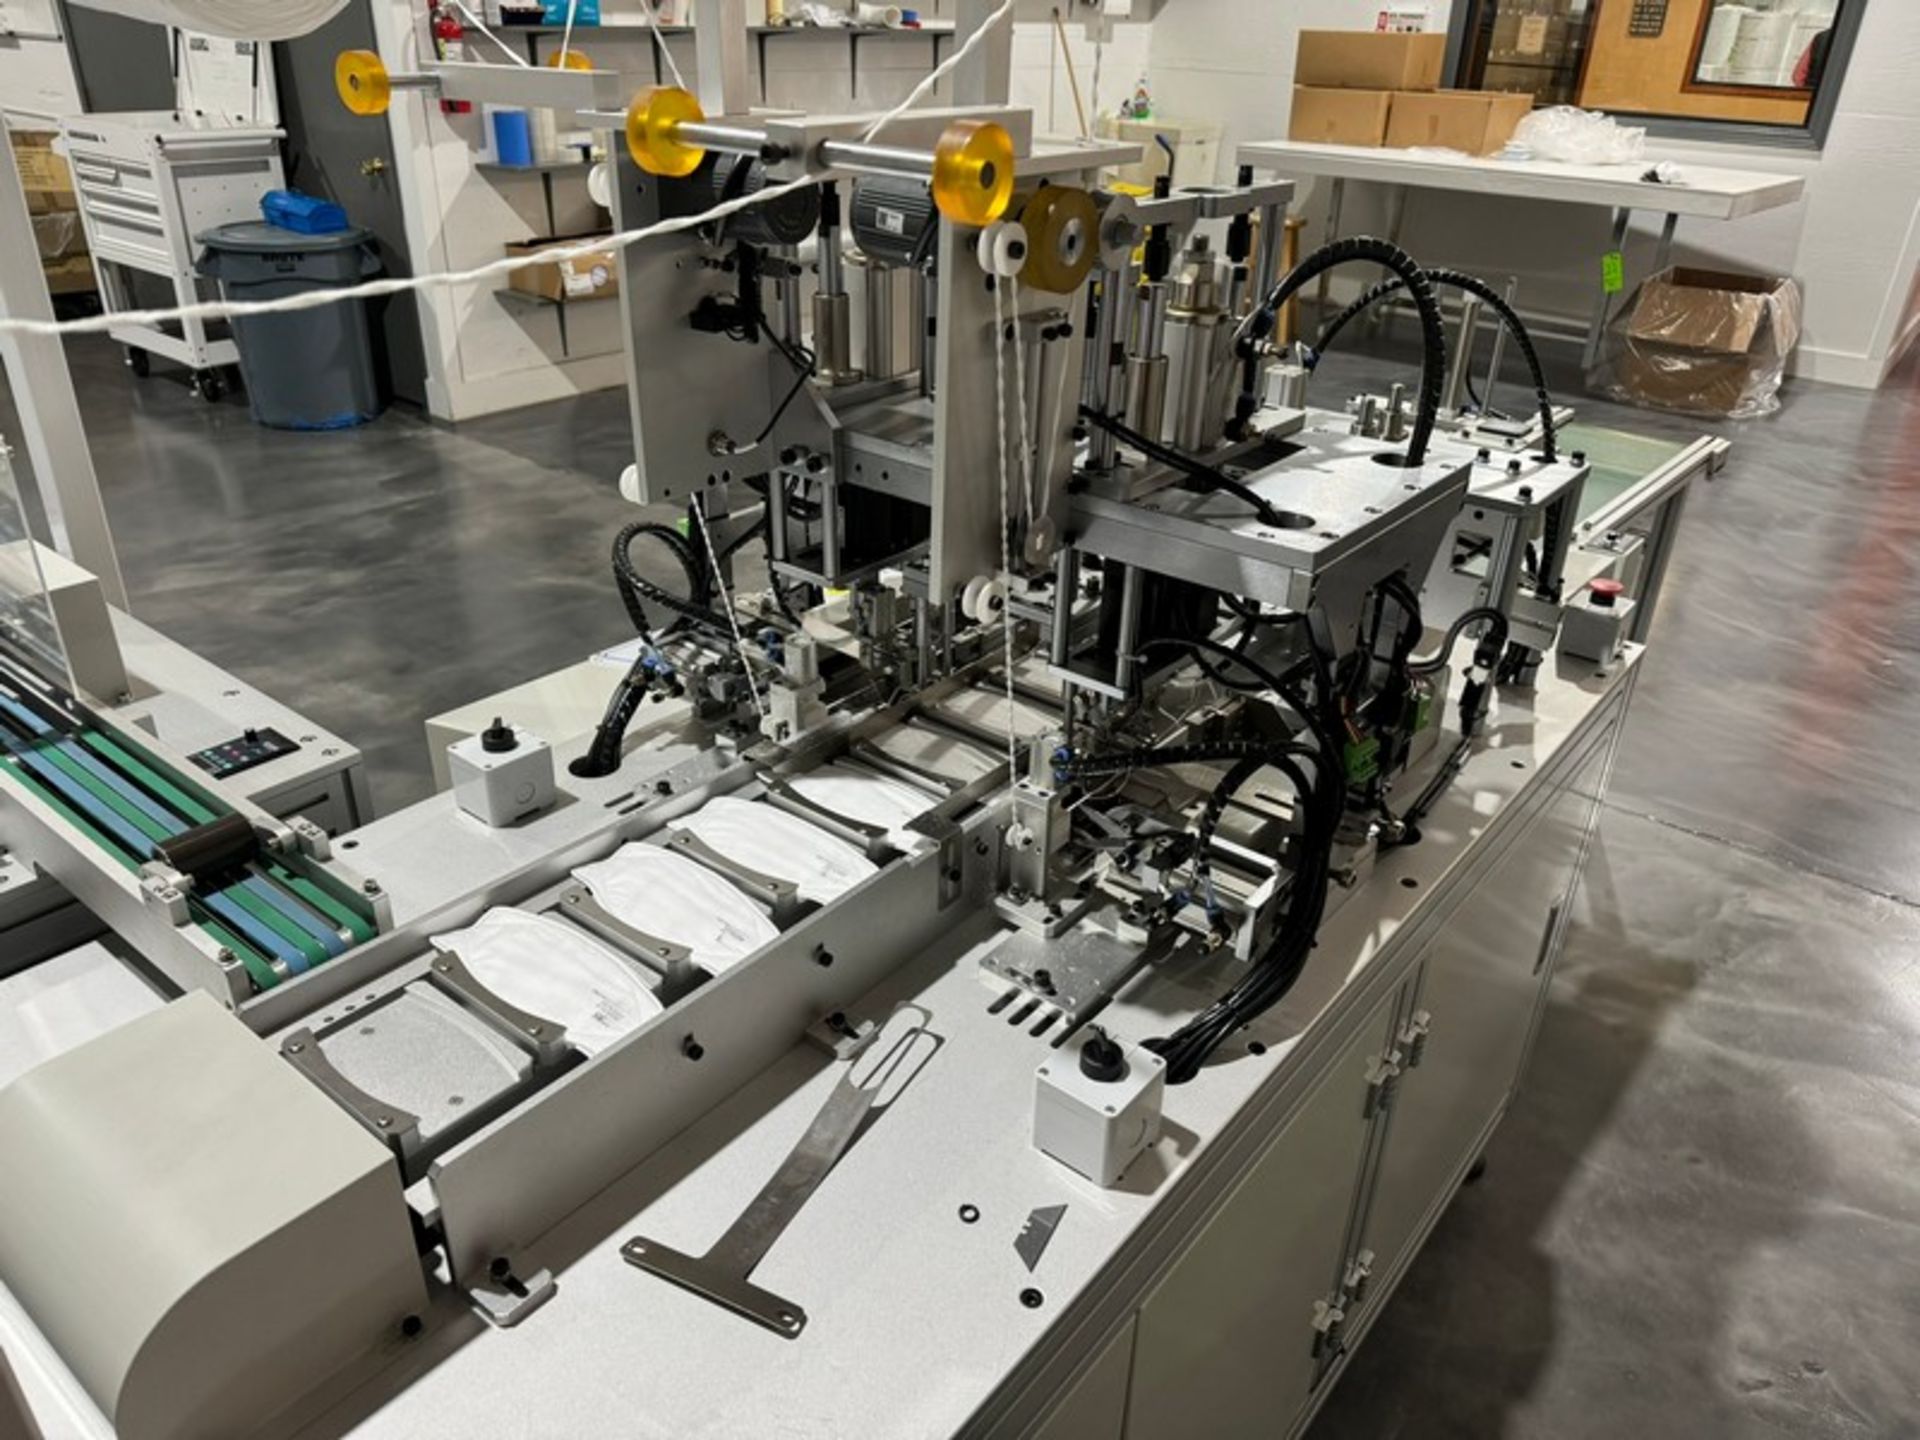 2022 KYD Automatic 6,000 Units Per Hour Mask Manufacturing Line, Includes Unwinding Station, Rolling - Image 8 of 30